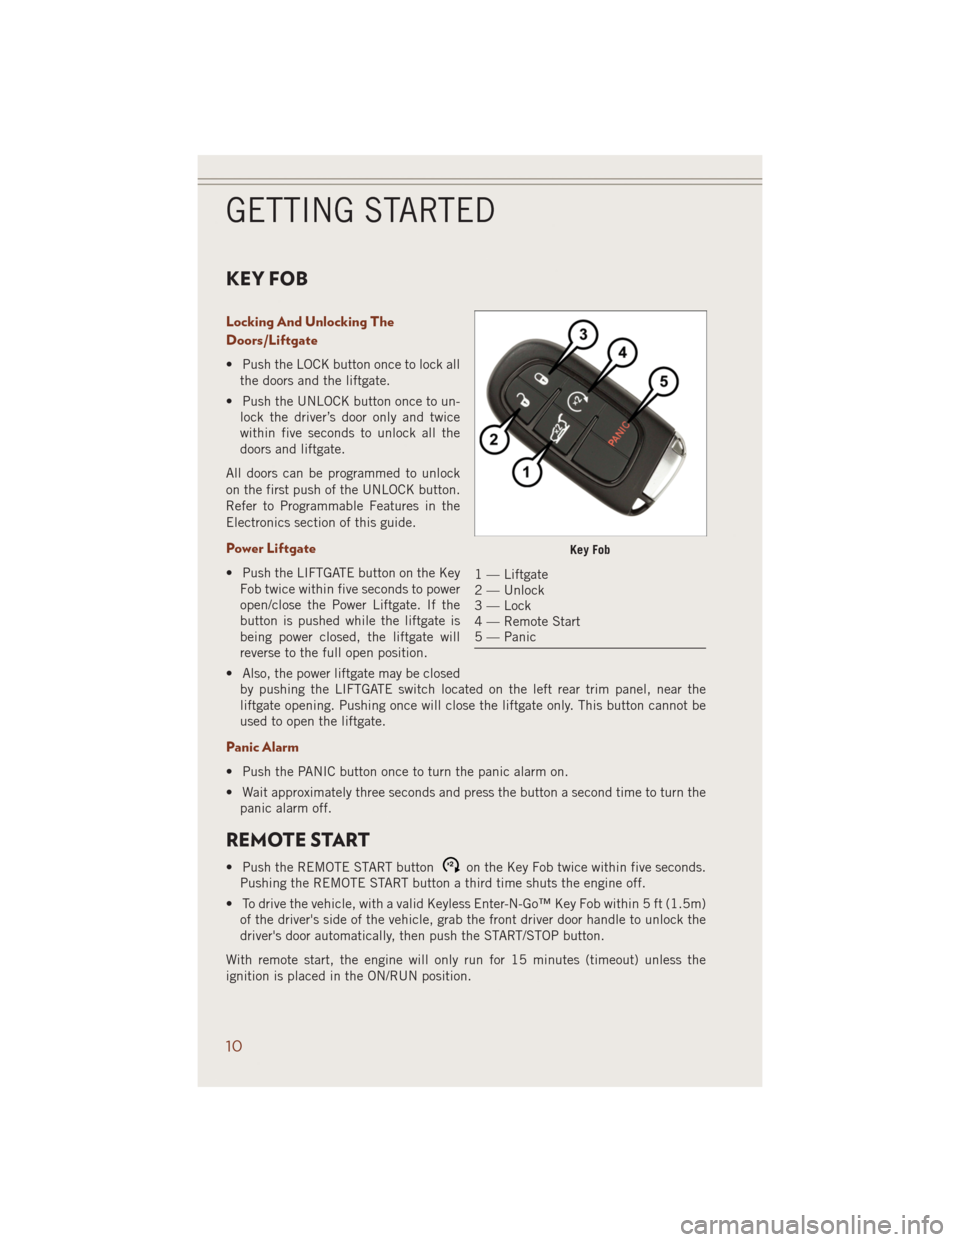 JEEP GRAND CHEROKEE 2014 WK2 / 4.G User Guide KEY FOB
Locking And Unlocking The
Doors/Liftgate
• Push the LOCK button once to lock all
the doors and the liftgate.
• Push the UNLOCK button once to un-
lock the driver’s door only and twice
wi